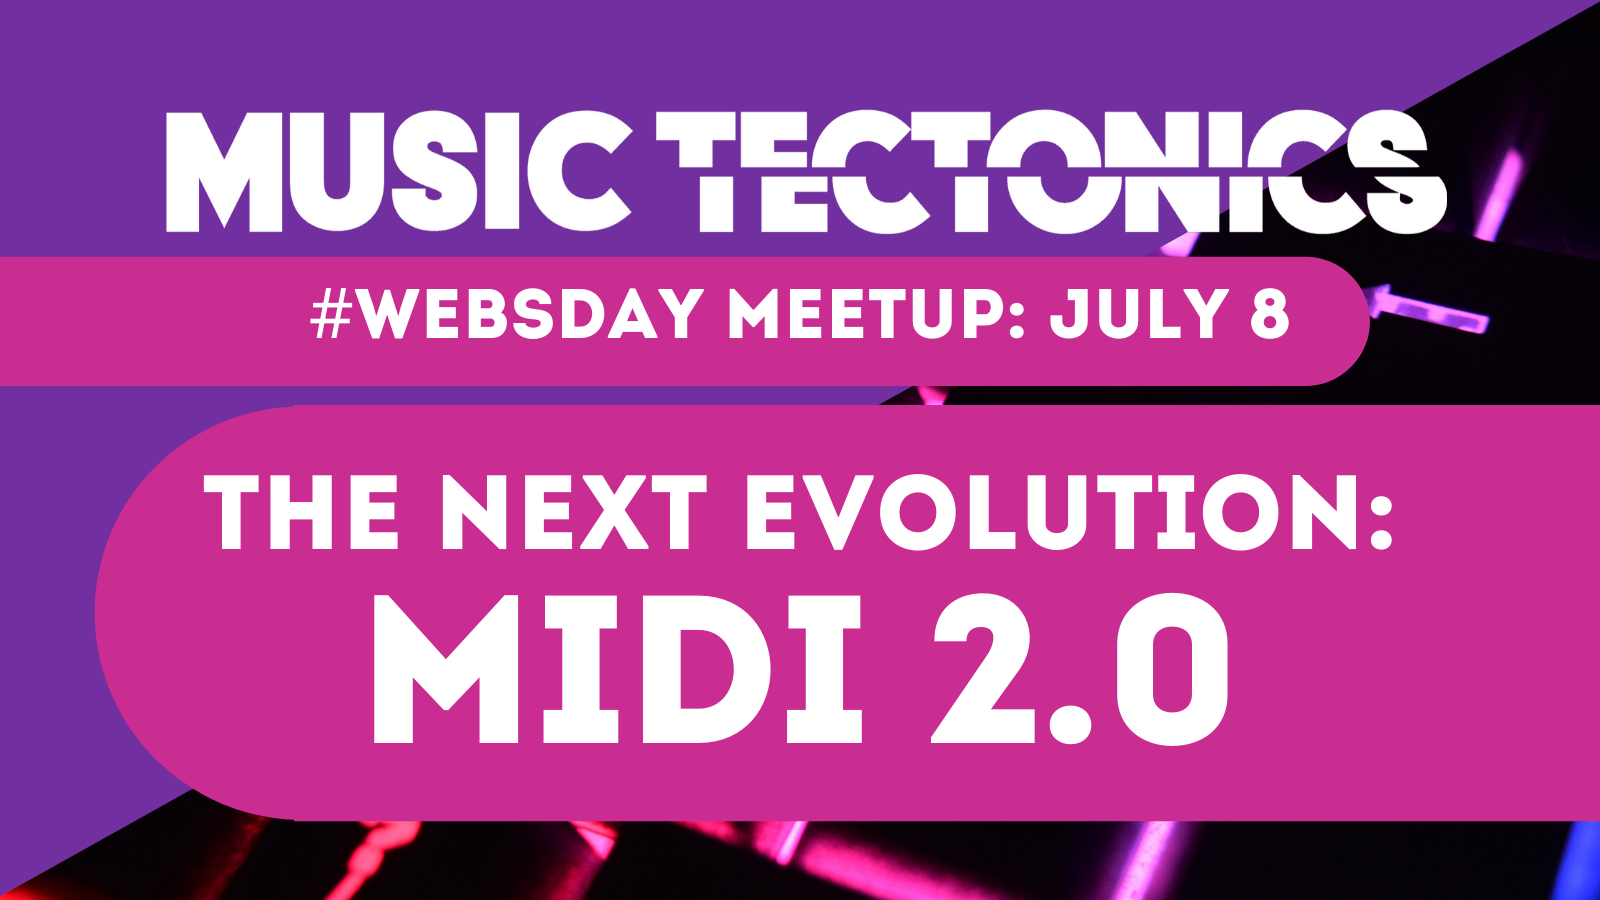 Tune in to a free webinar on the brand new MIDI 2.0 next week